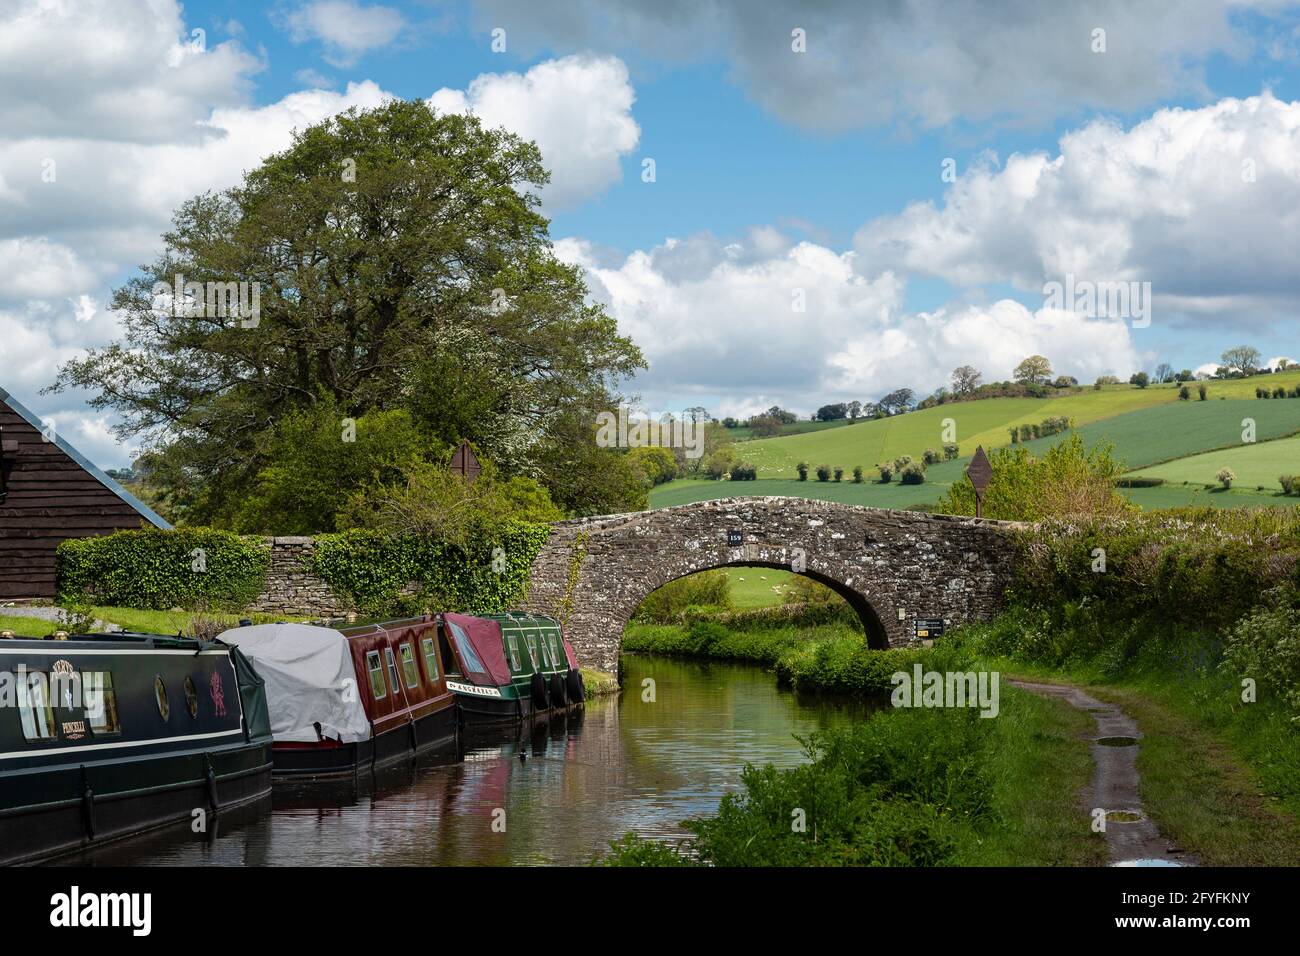 Bridge 159, Monmouthshire and Brecon Canal, Powys, Wales, UK Stock Photo